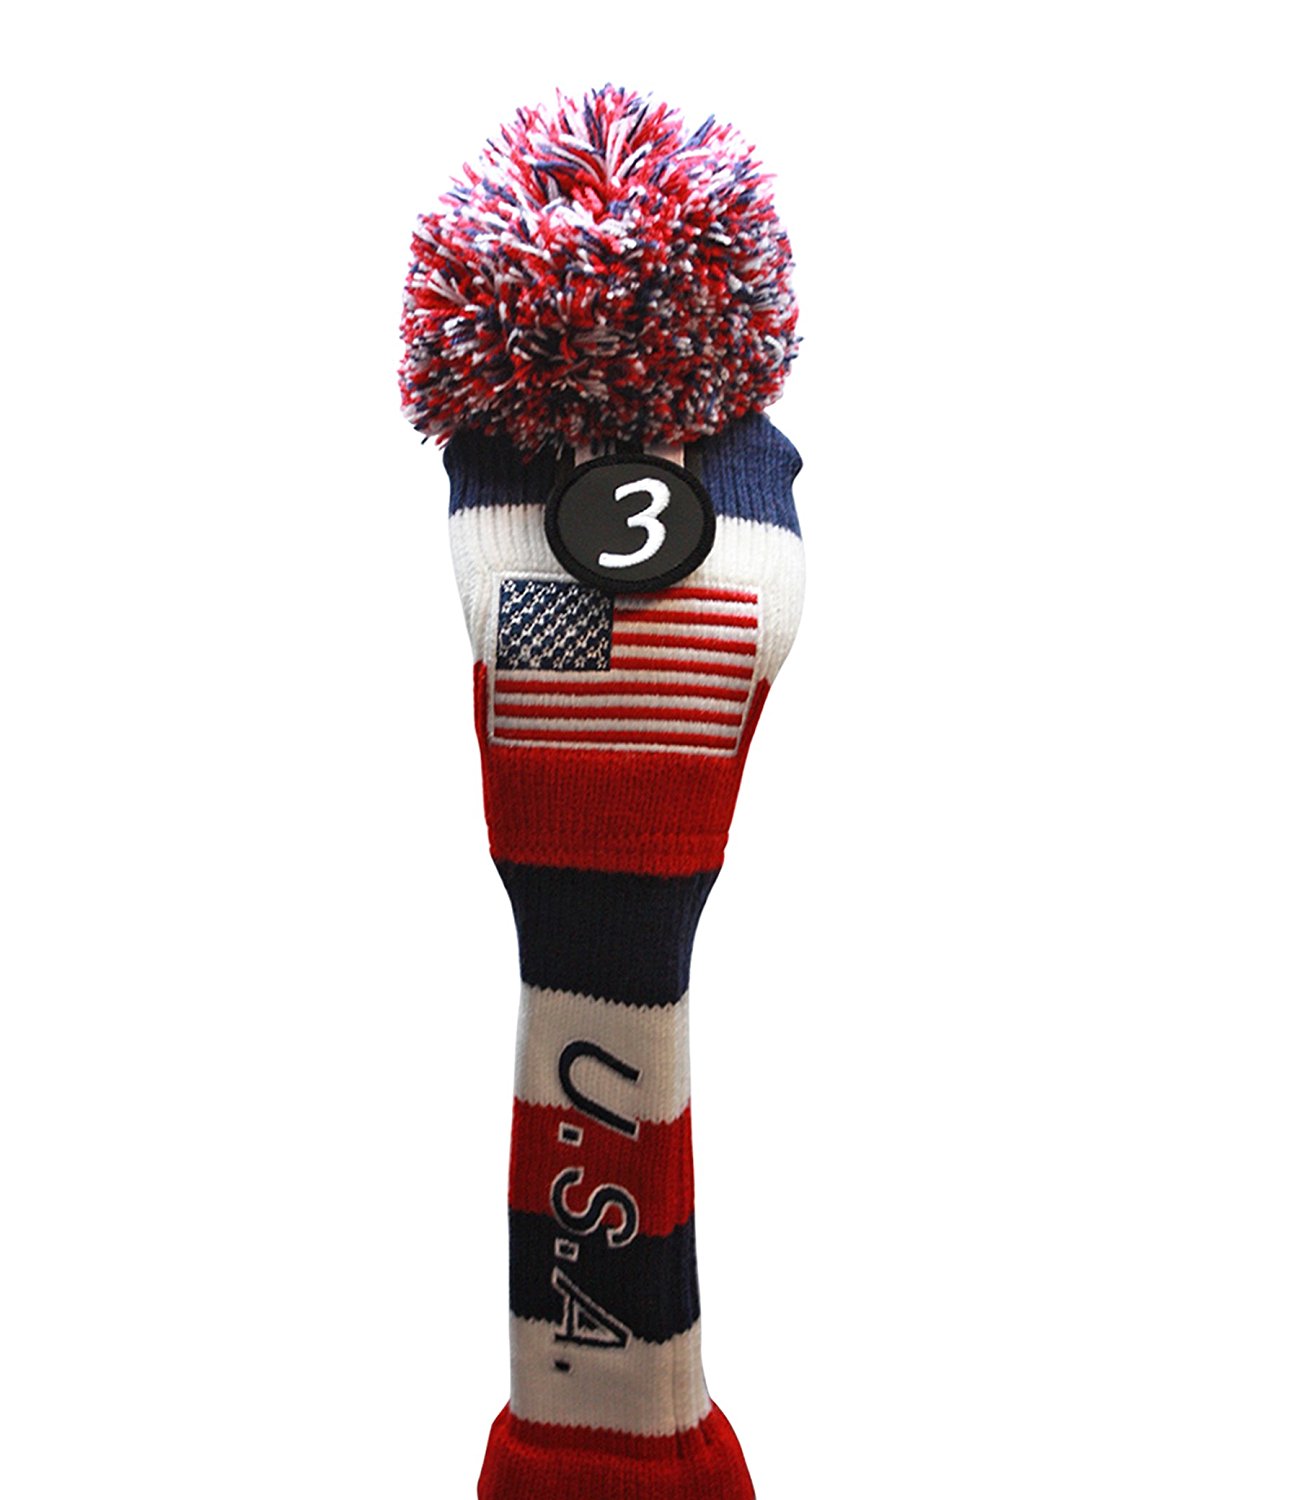 USA Majek Golf 3 5 X Fairway Woods Headcovers Pom Pom Knit Limited Edition Vintage Classic Traditional Flag Stars Red White Blue Stripes Retro Head Cover Fits 260cc Woods - image 2 of 7